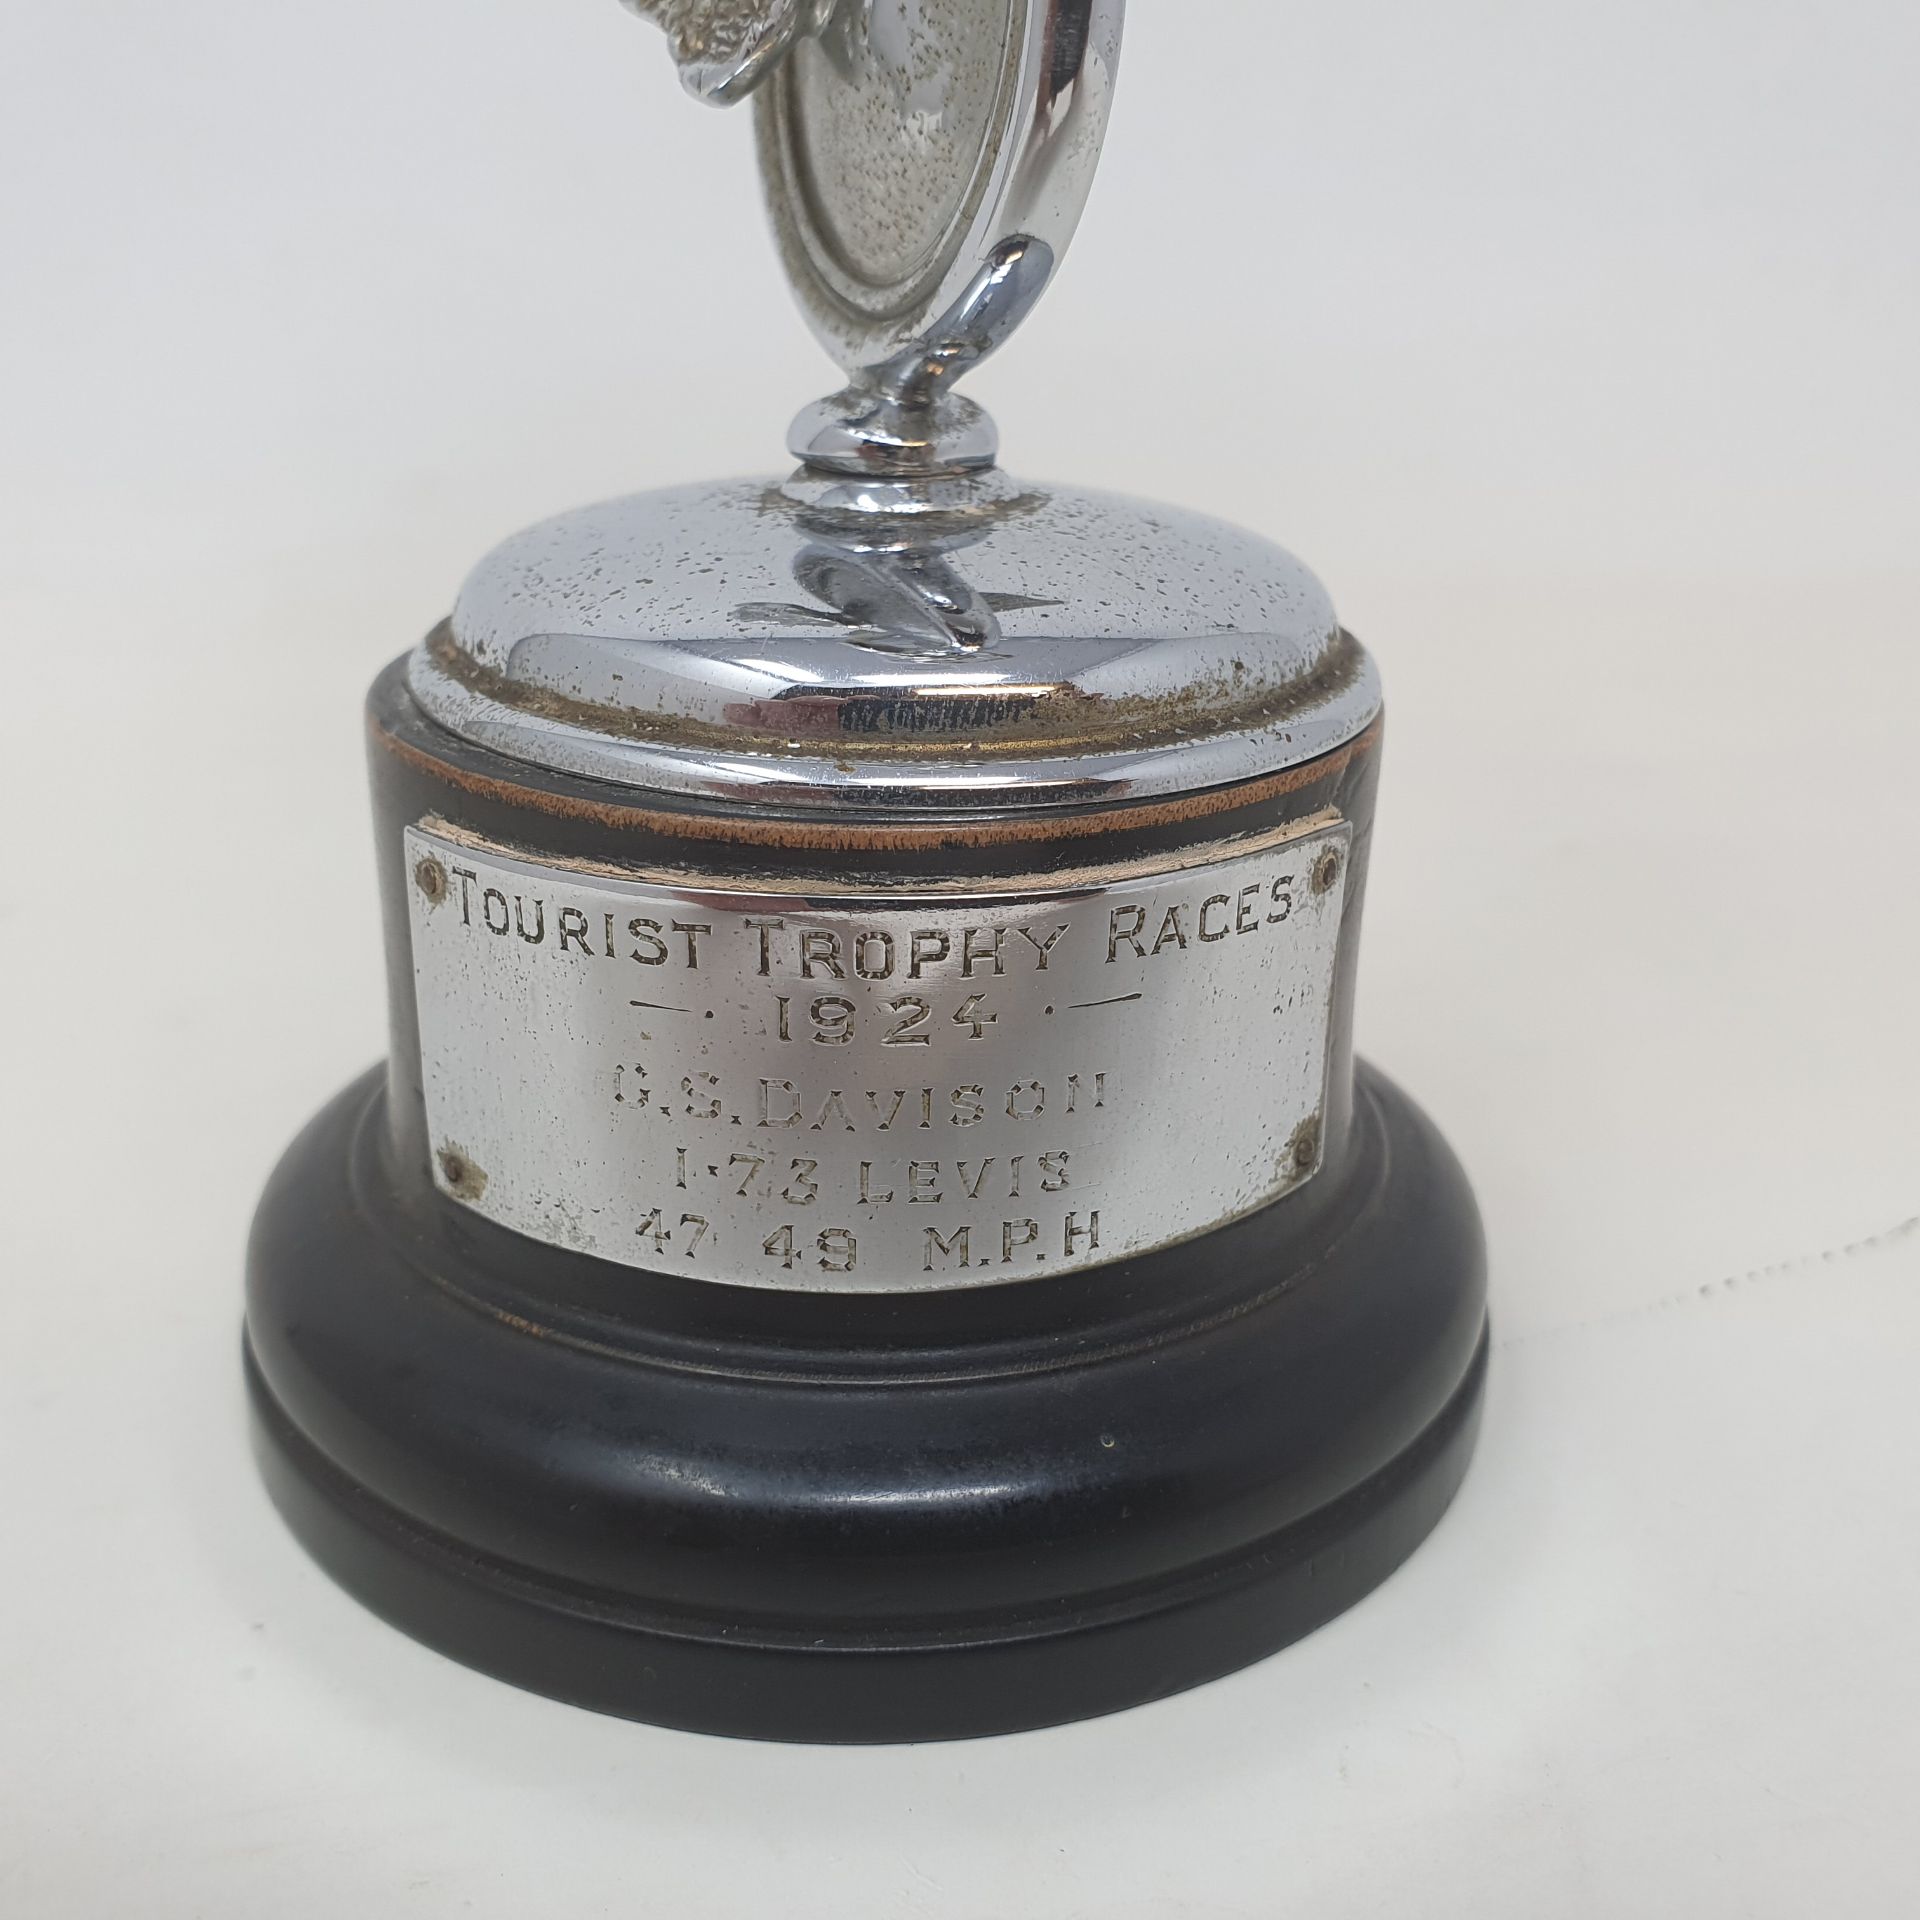 An Isle of Man TT silver replica trophy, 1924 award, mounted on a wooden plinth with applied - Image 5 of 5